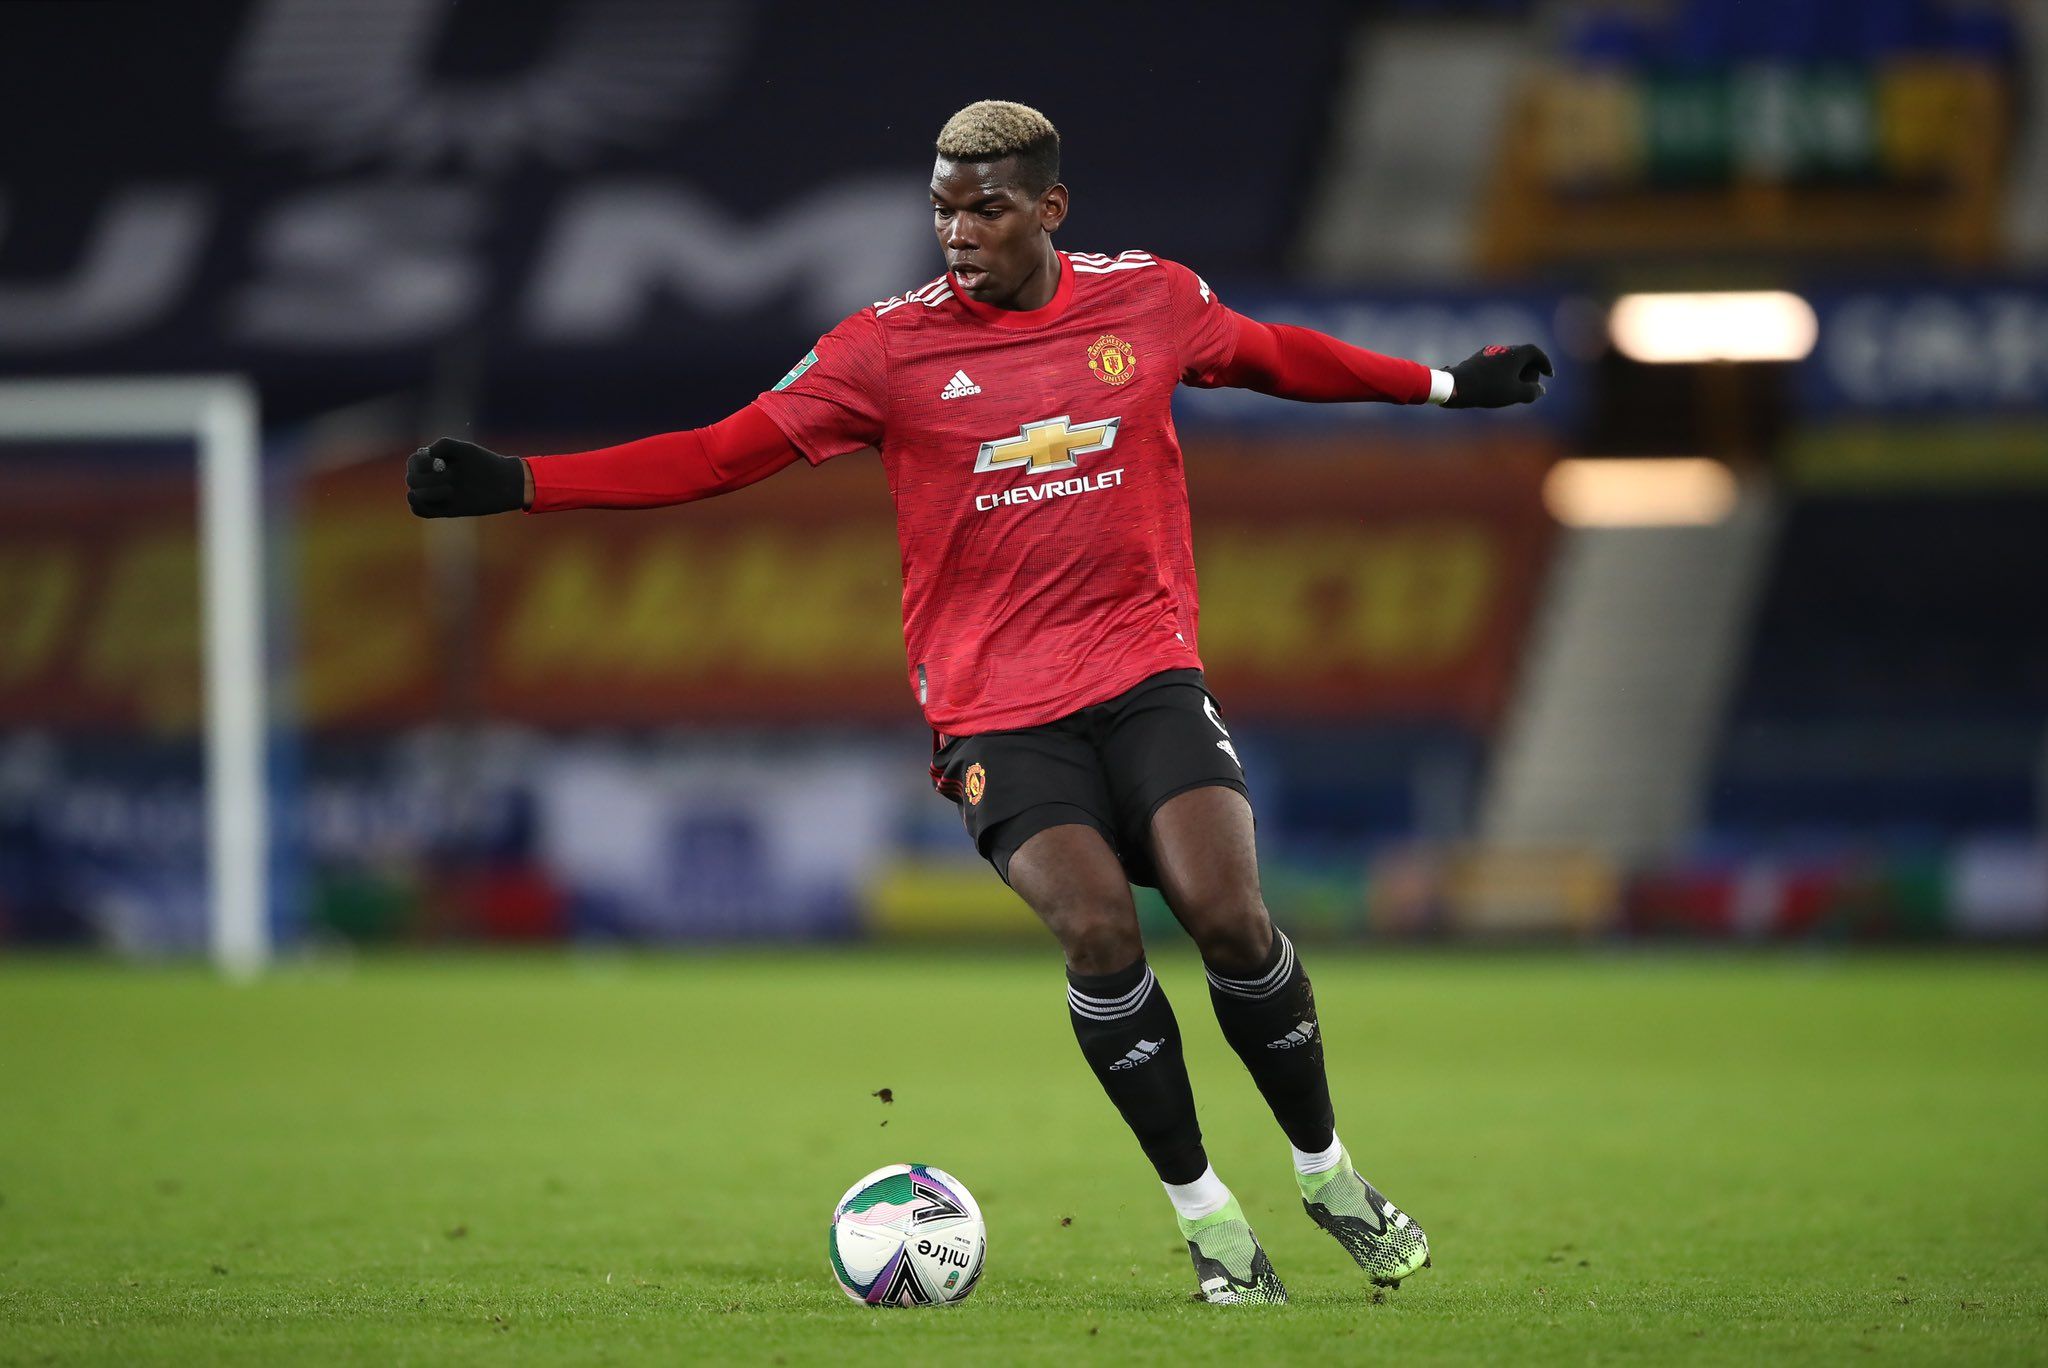 Manchester United will have to learn from League Cup semi-final defeat, says Paul Pogba